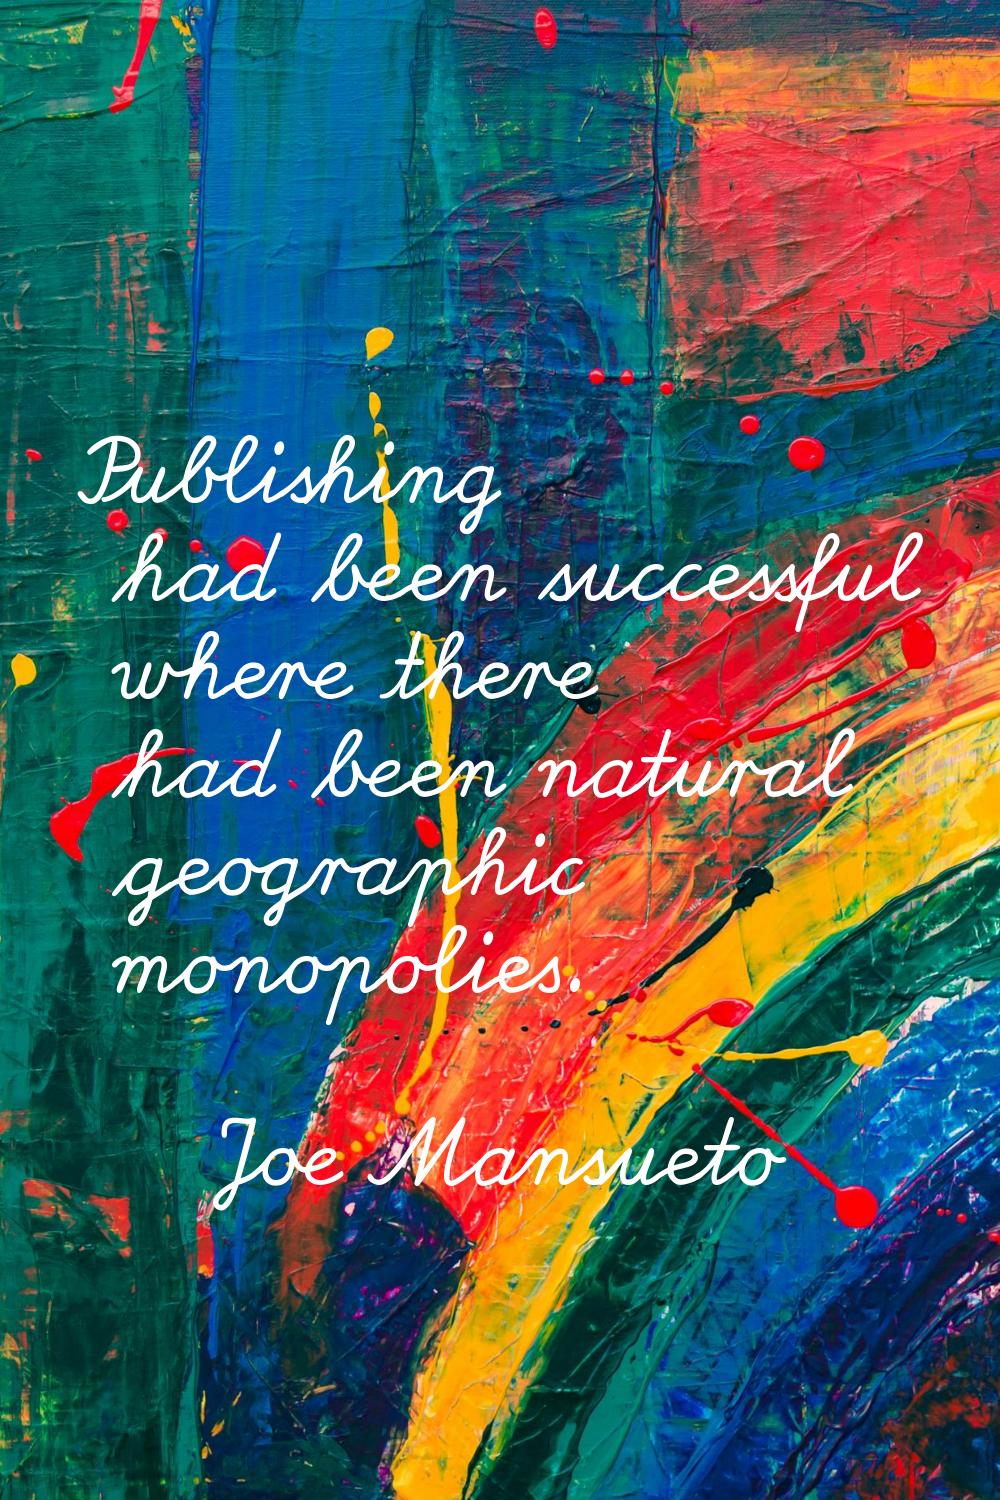 Publishing had been successful where there had been natural geographic monopolies.